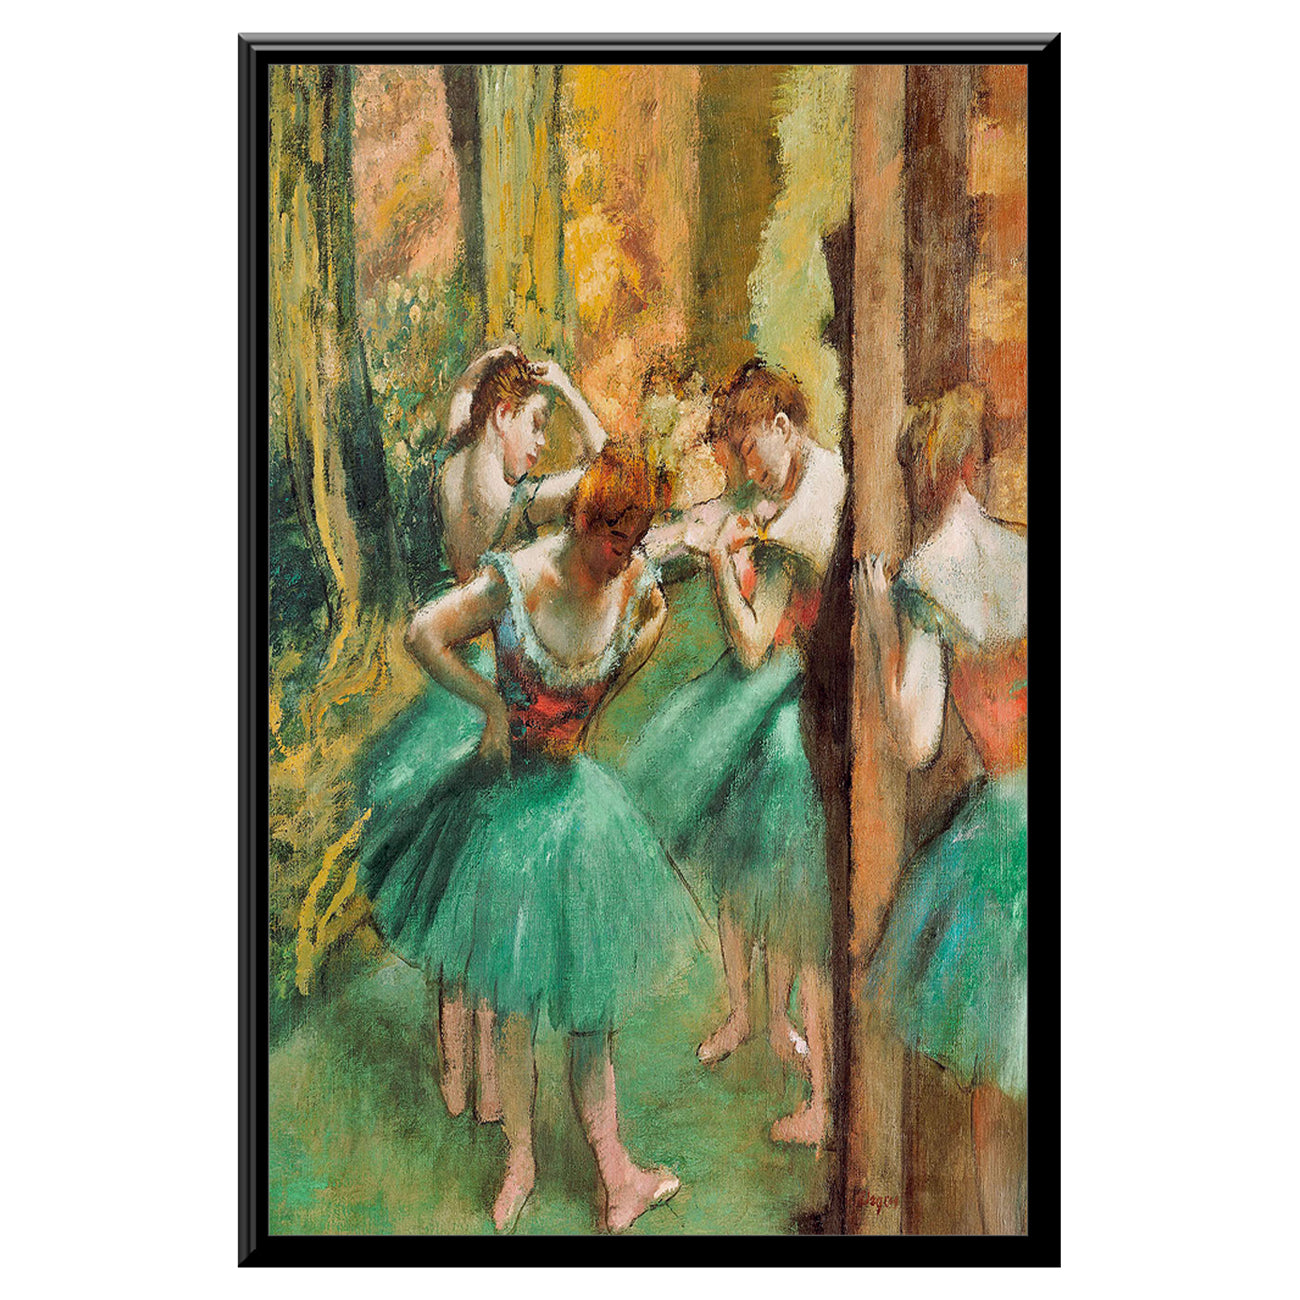 Dancers, Pink and Green (ca. 1890) by Edgar Degas